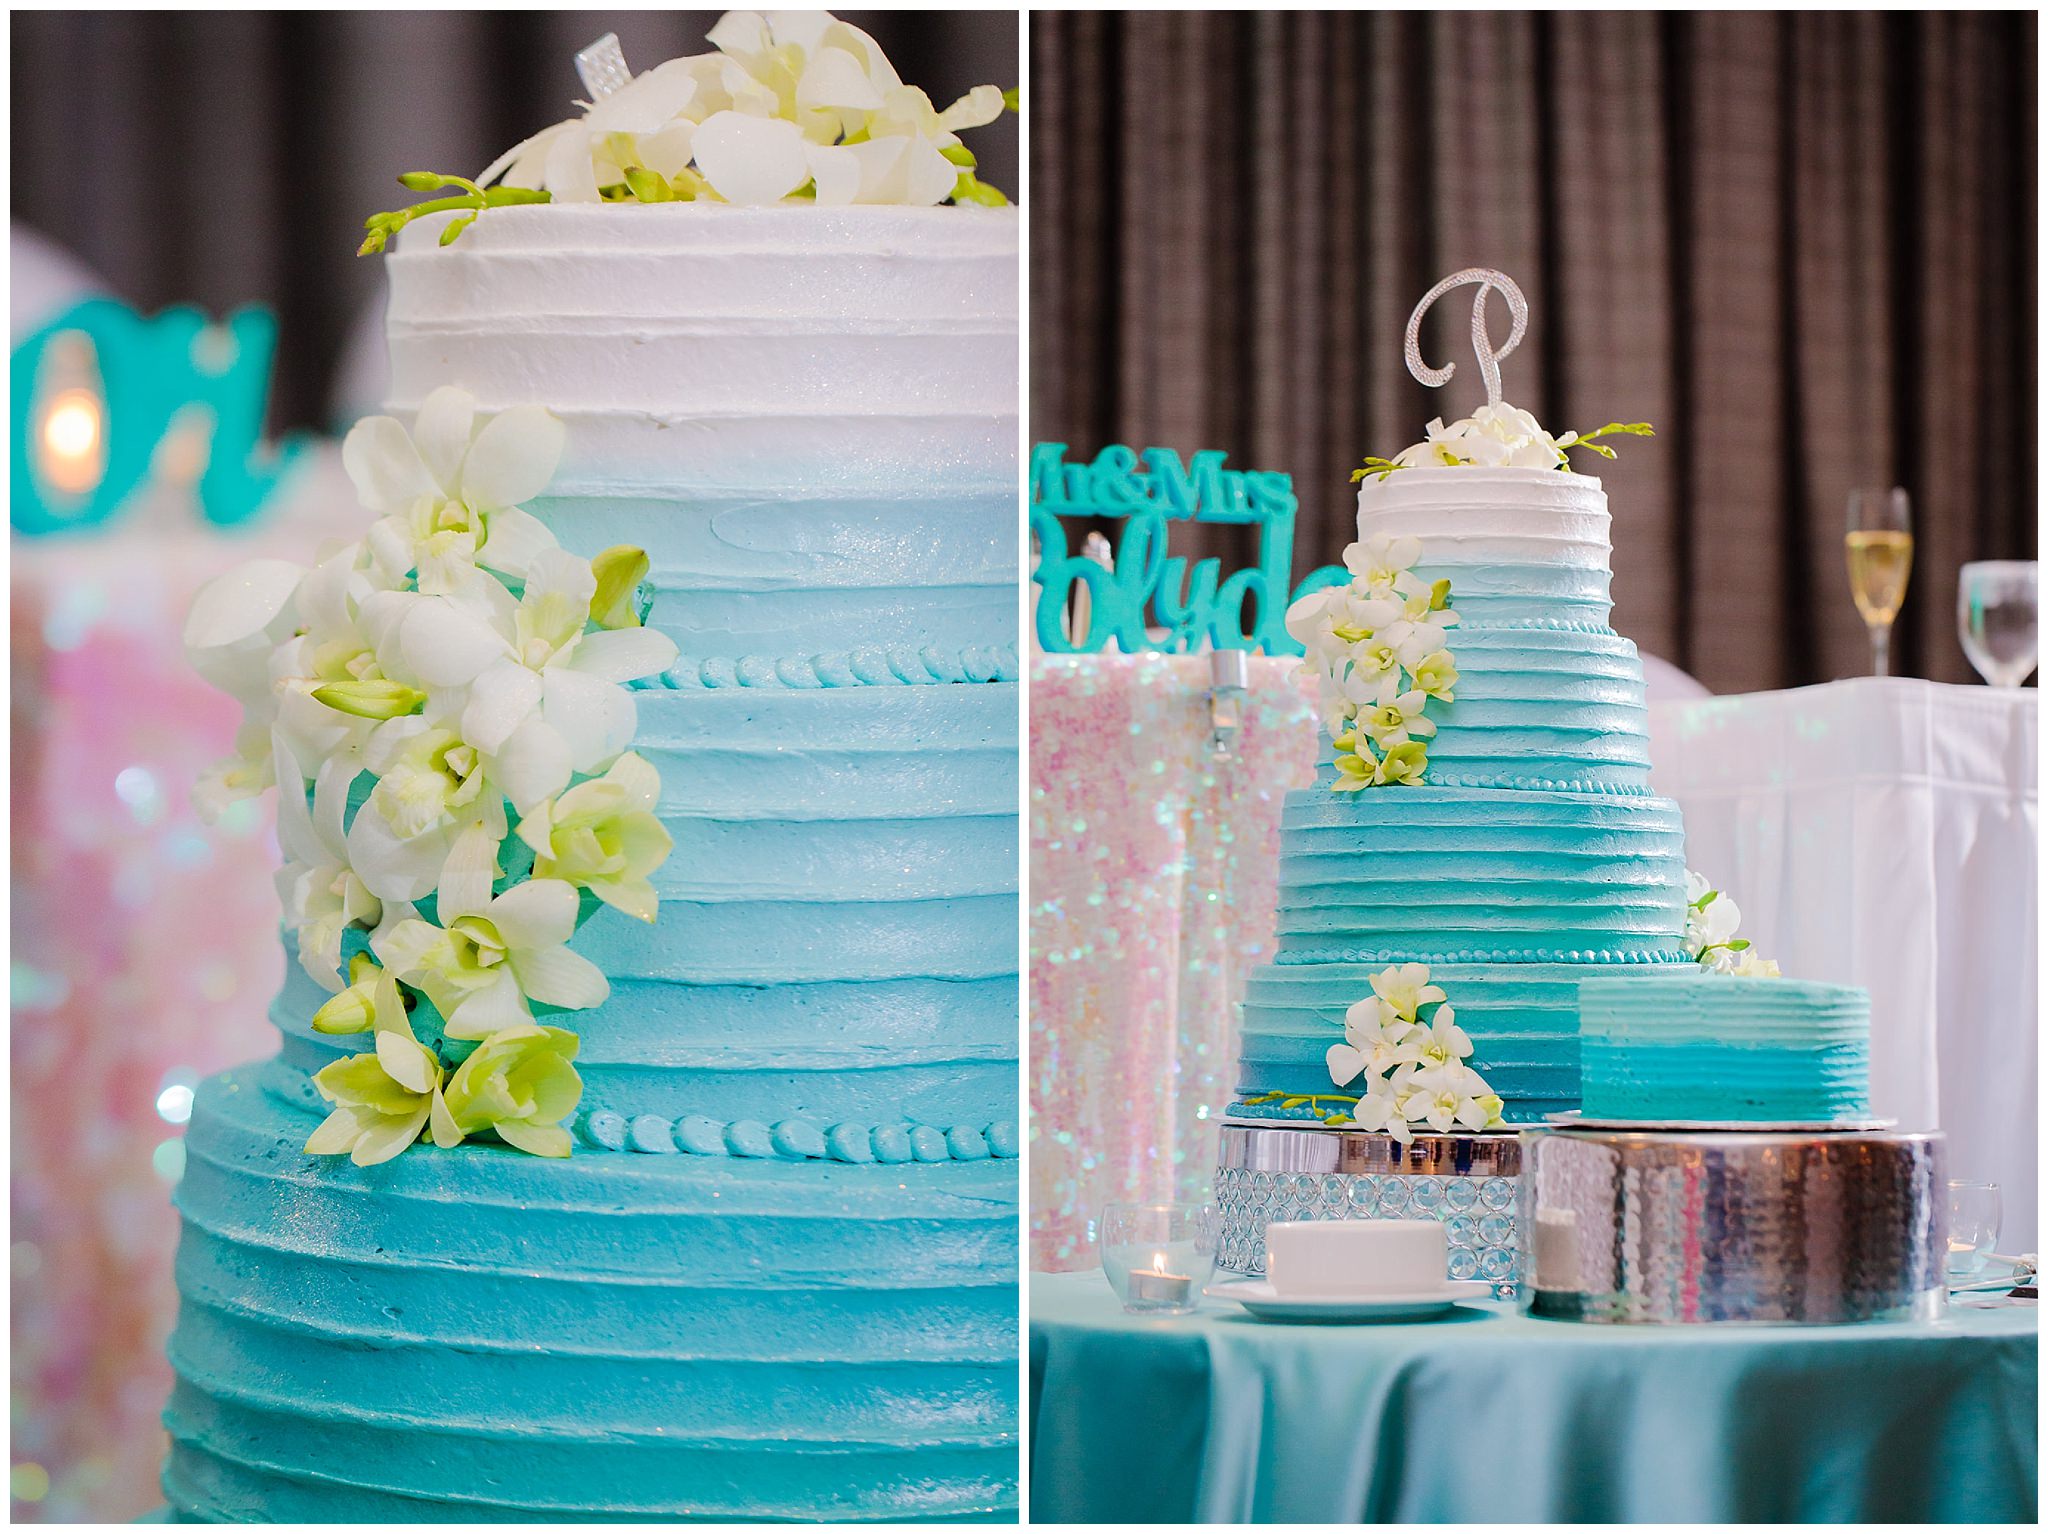 Ombre turquoise wedding cake by Carol's Cakes at the Pittsburgh Airport Marriott